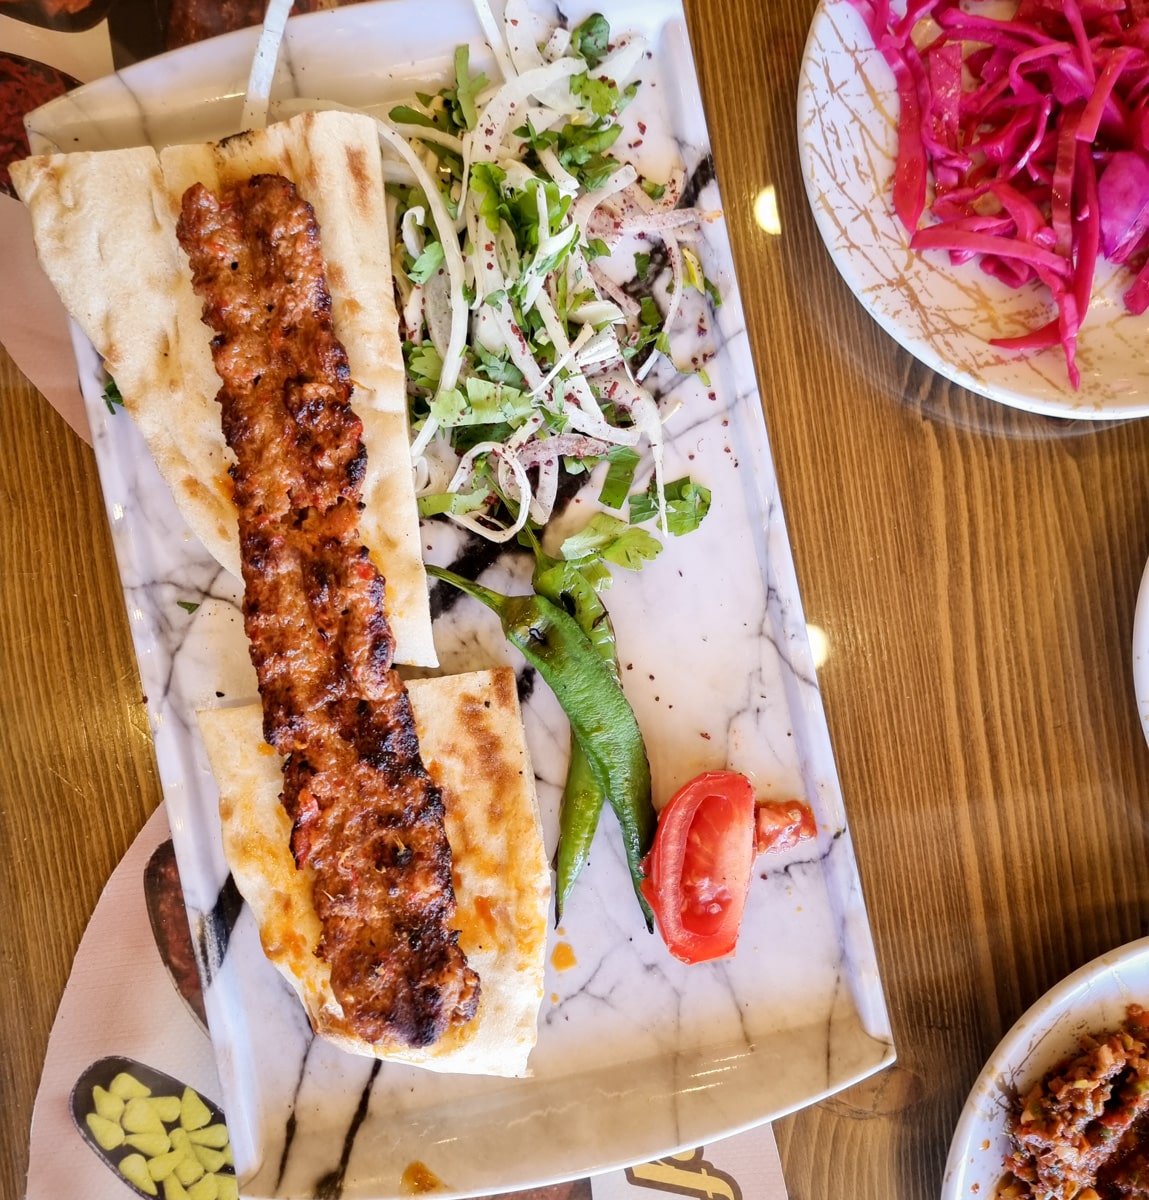 A plate of adana kebab served in Goreme, Cappadocia, with flatbread, grilled green pepper, and tomato, accompanied by sides of onion salad and pickled cabbage.